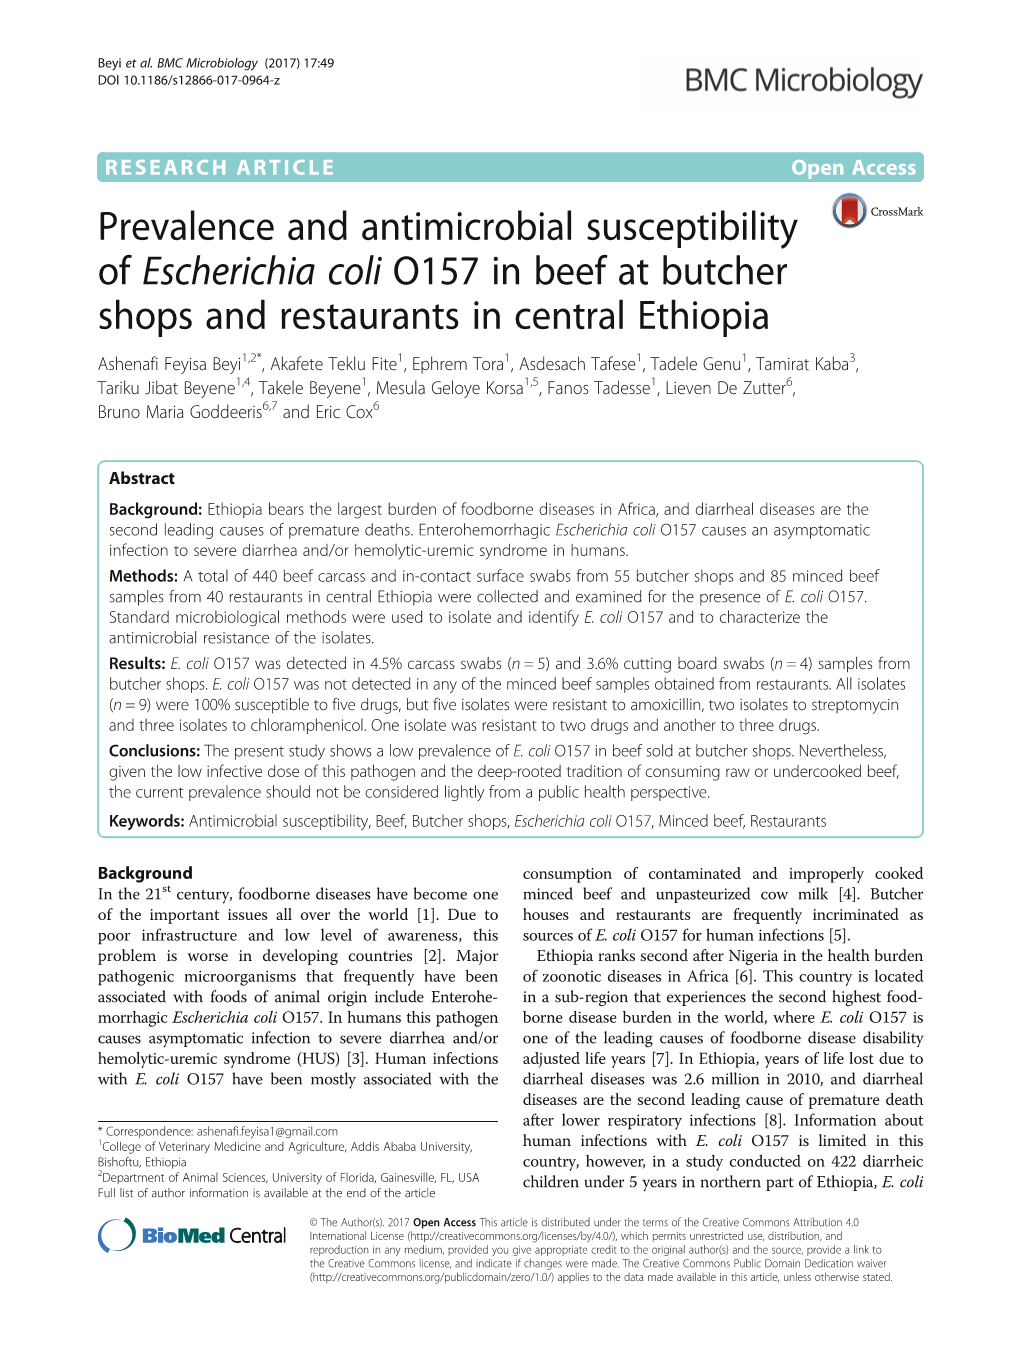 Prevalence and Antimicrobial Susceptibility of Escherichia Coli O157 in Beef at Butcher Shops and Restaurants in Central Ethiopi